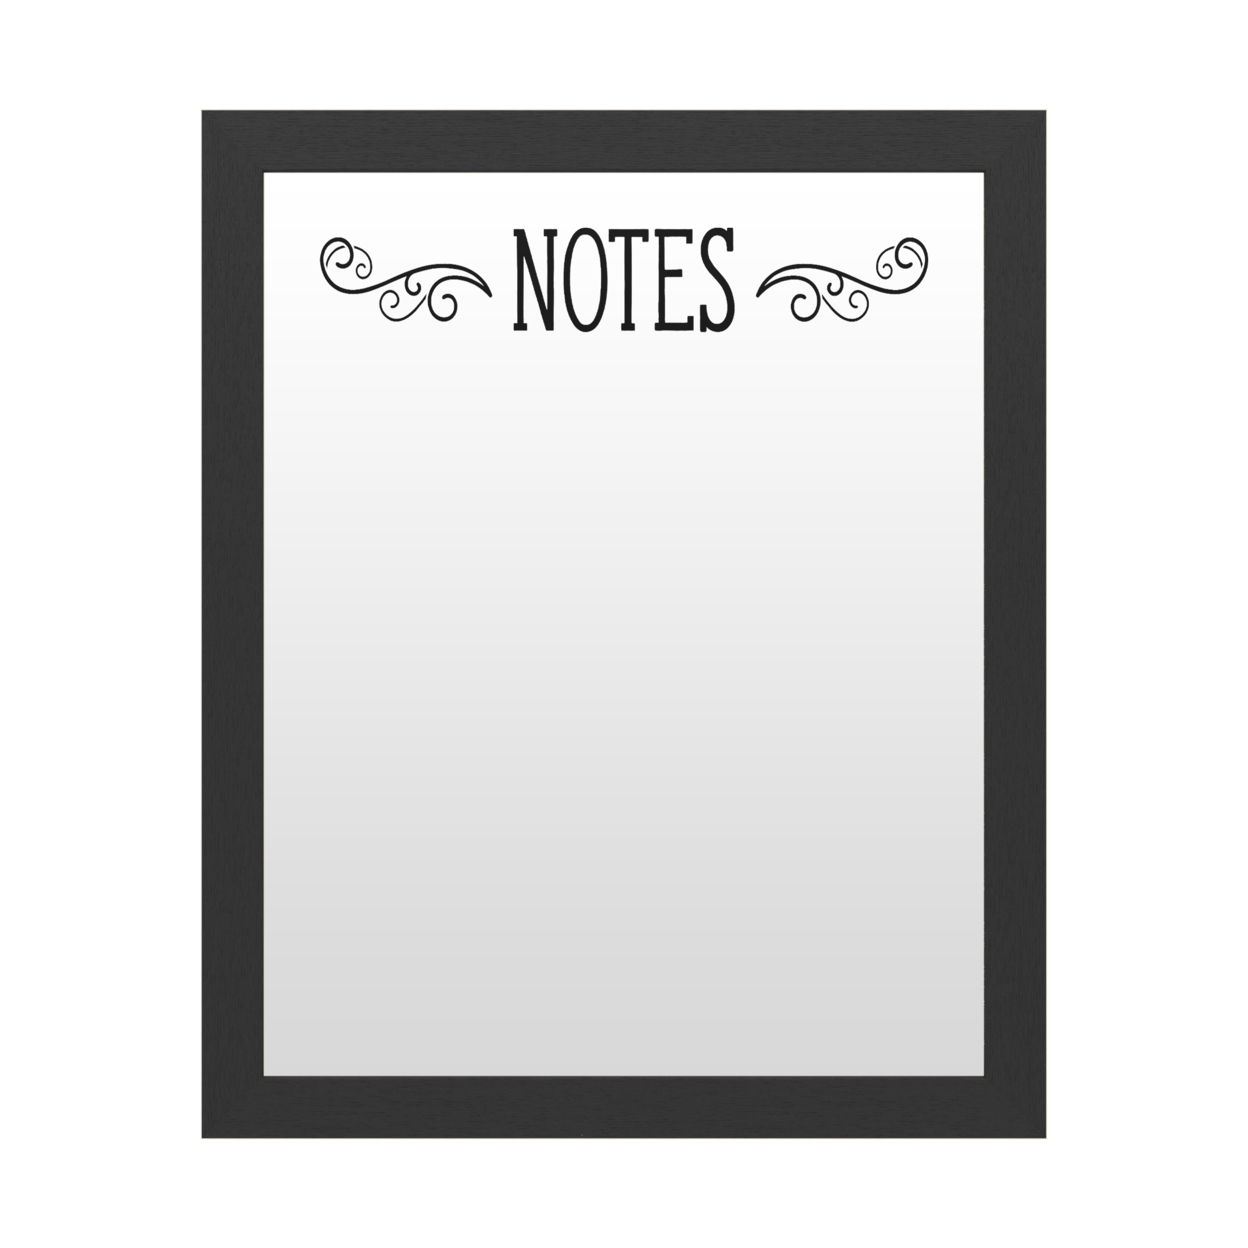 Dry Erase 16 X 20 Marker Board With Printed Artwork - Notes Serrif White Board - Ready To Hang